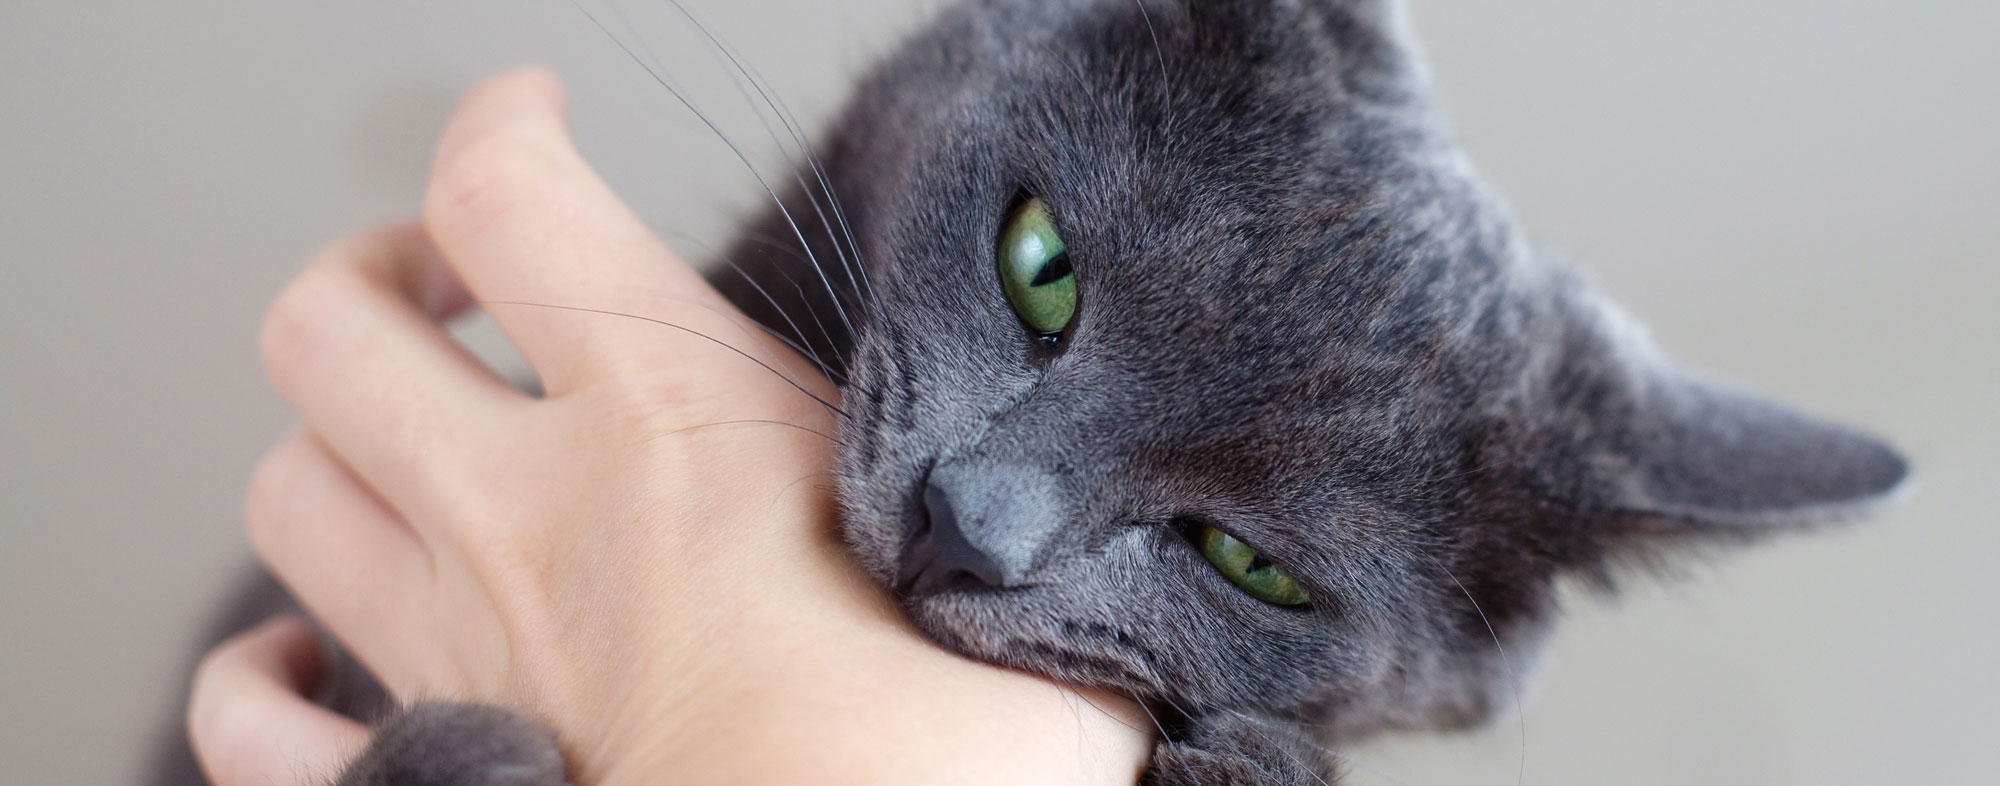 How to Stop Your Cat From Biting | Hartz